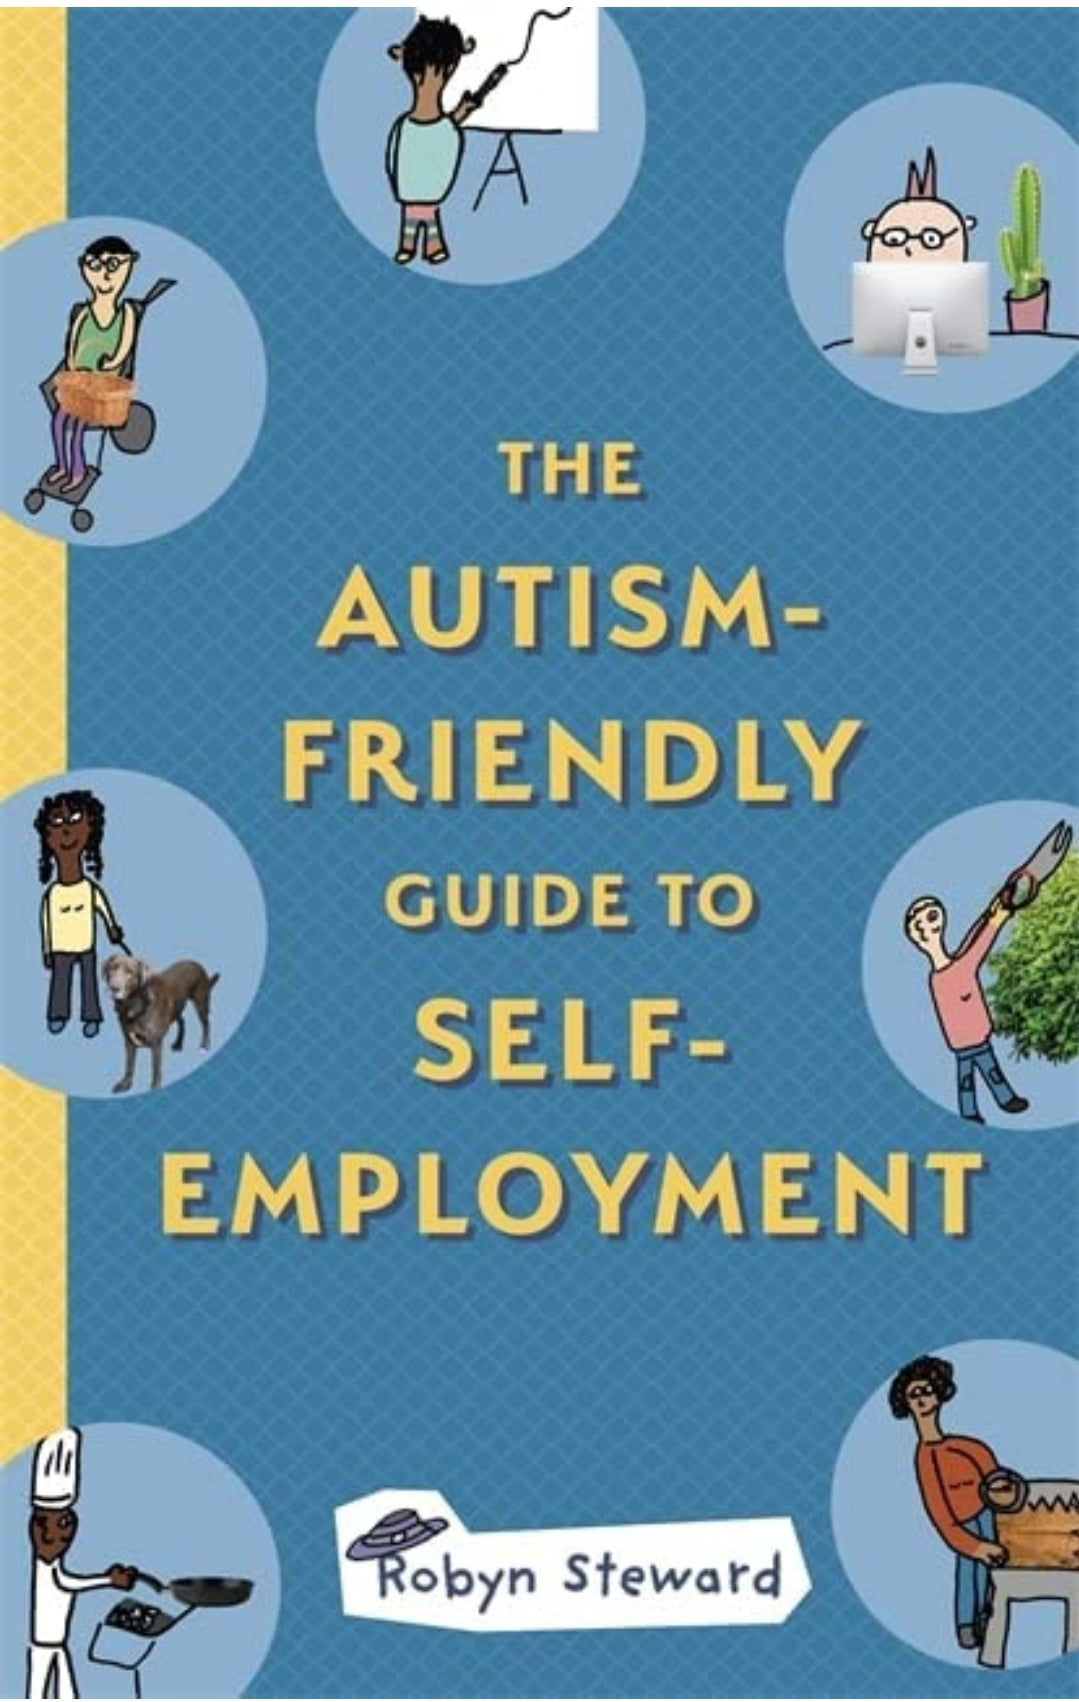 The Autism-Friendly Guide to Self-Employment